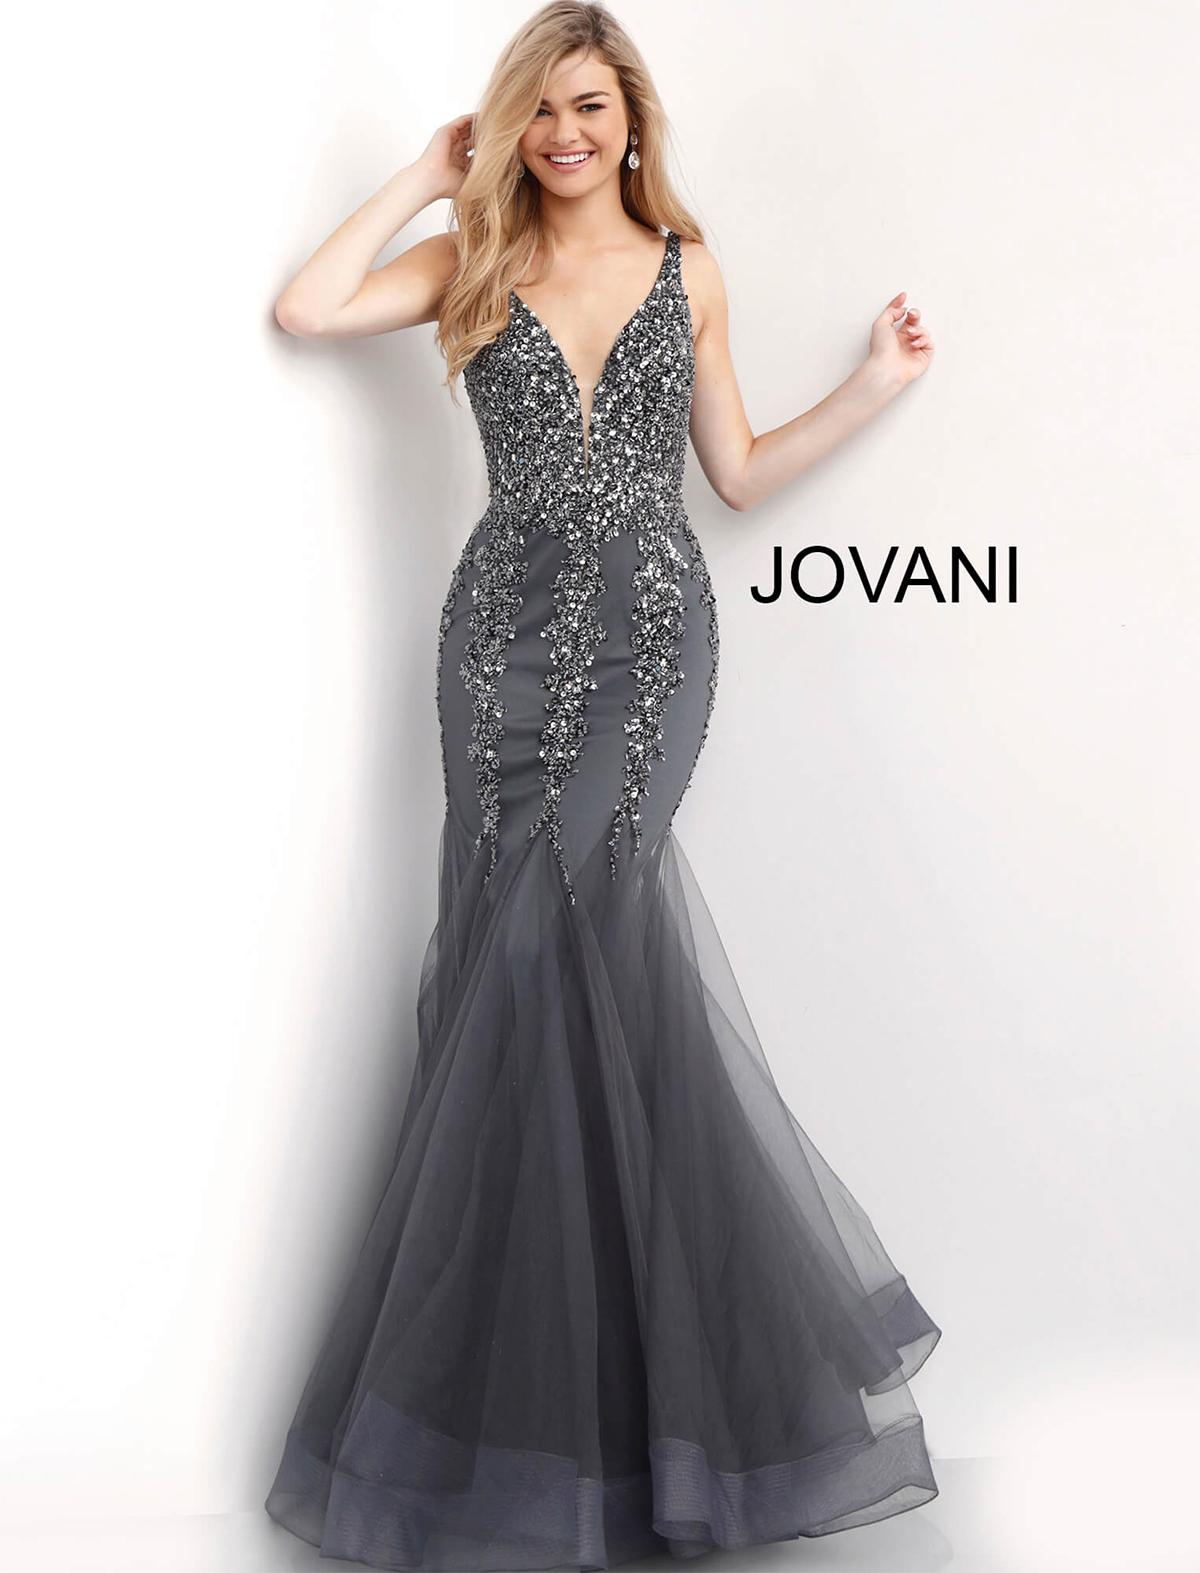 Decide On What Color Prom Dress To Wear 